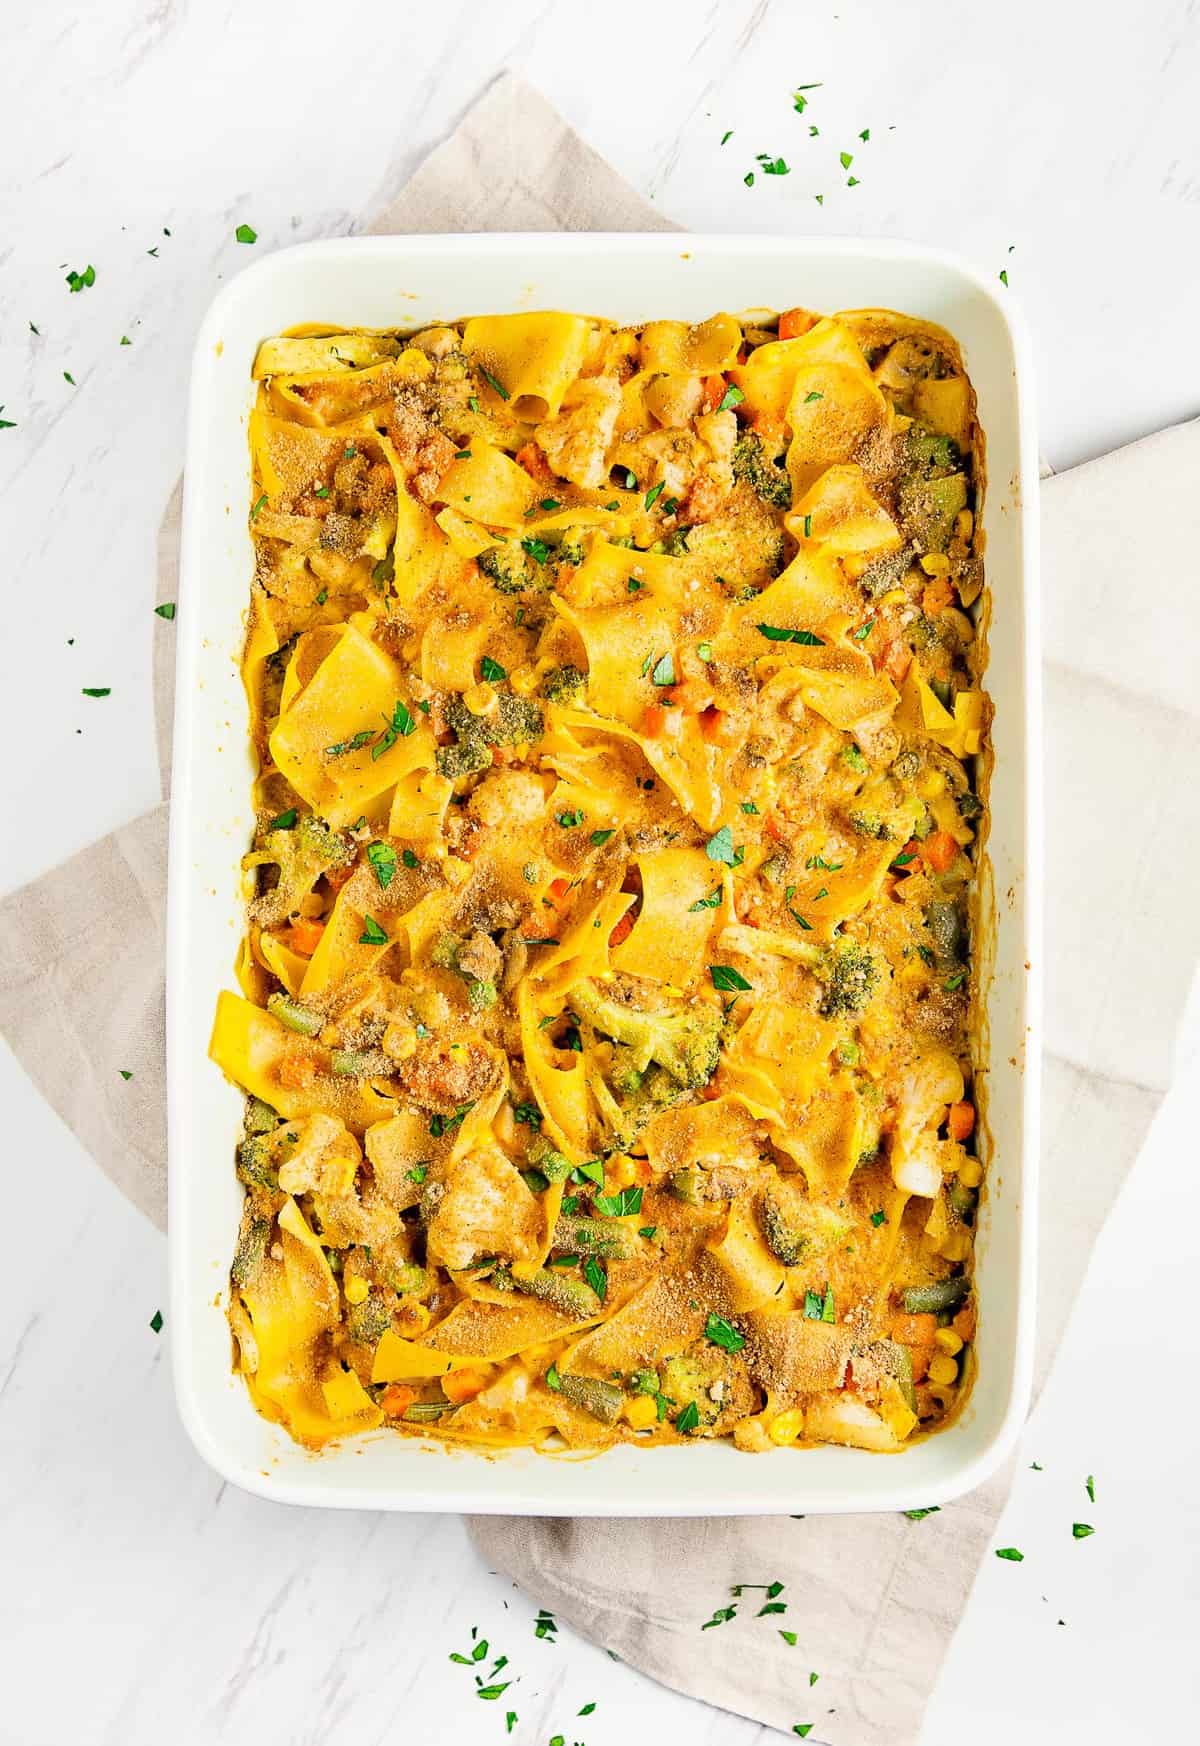 Vegan Tuna Noodle Casserole, vegan, vegetarian, whole food plant based, gluten free, recipe, wfpb, healthy, oil free, no refined sugar, no oil, refined sugar free, dinner, side, side dish, dairy free, dinner party, entertaining